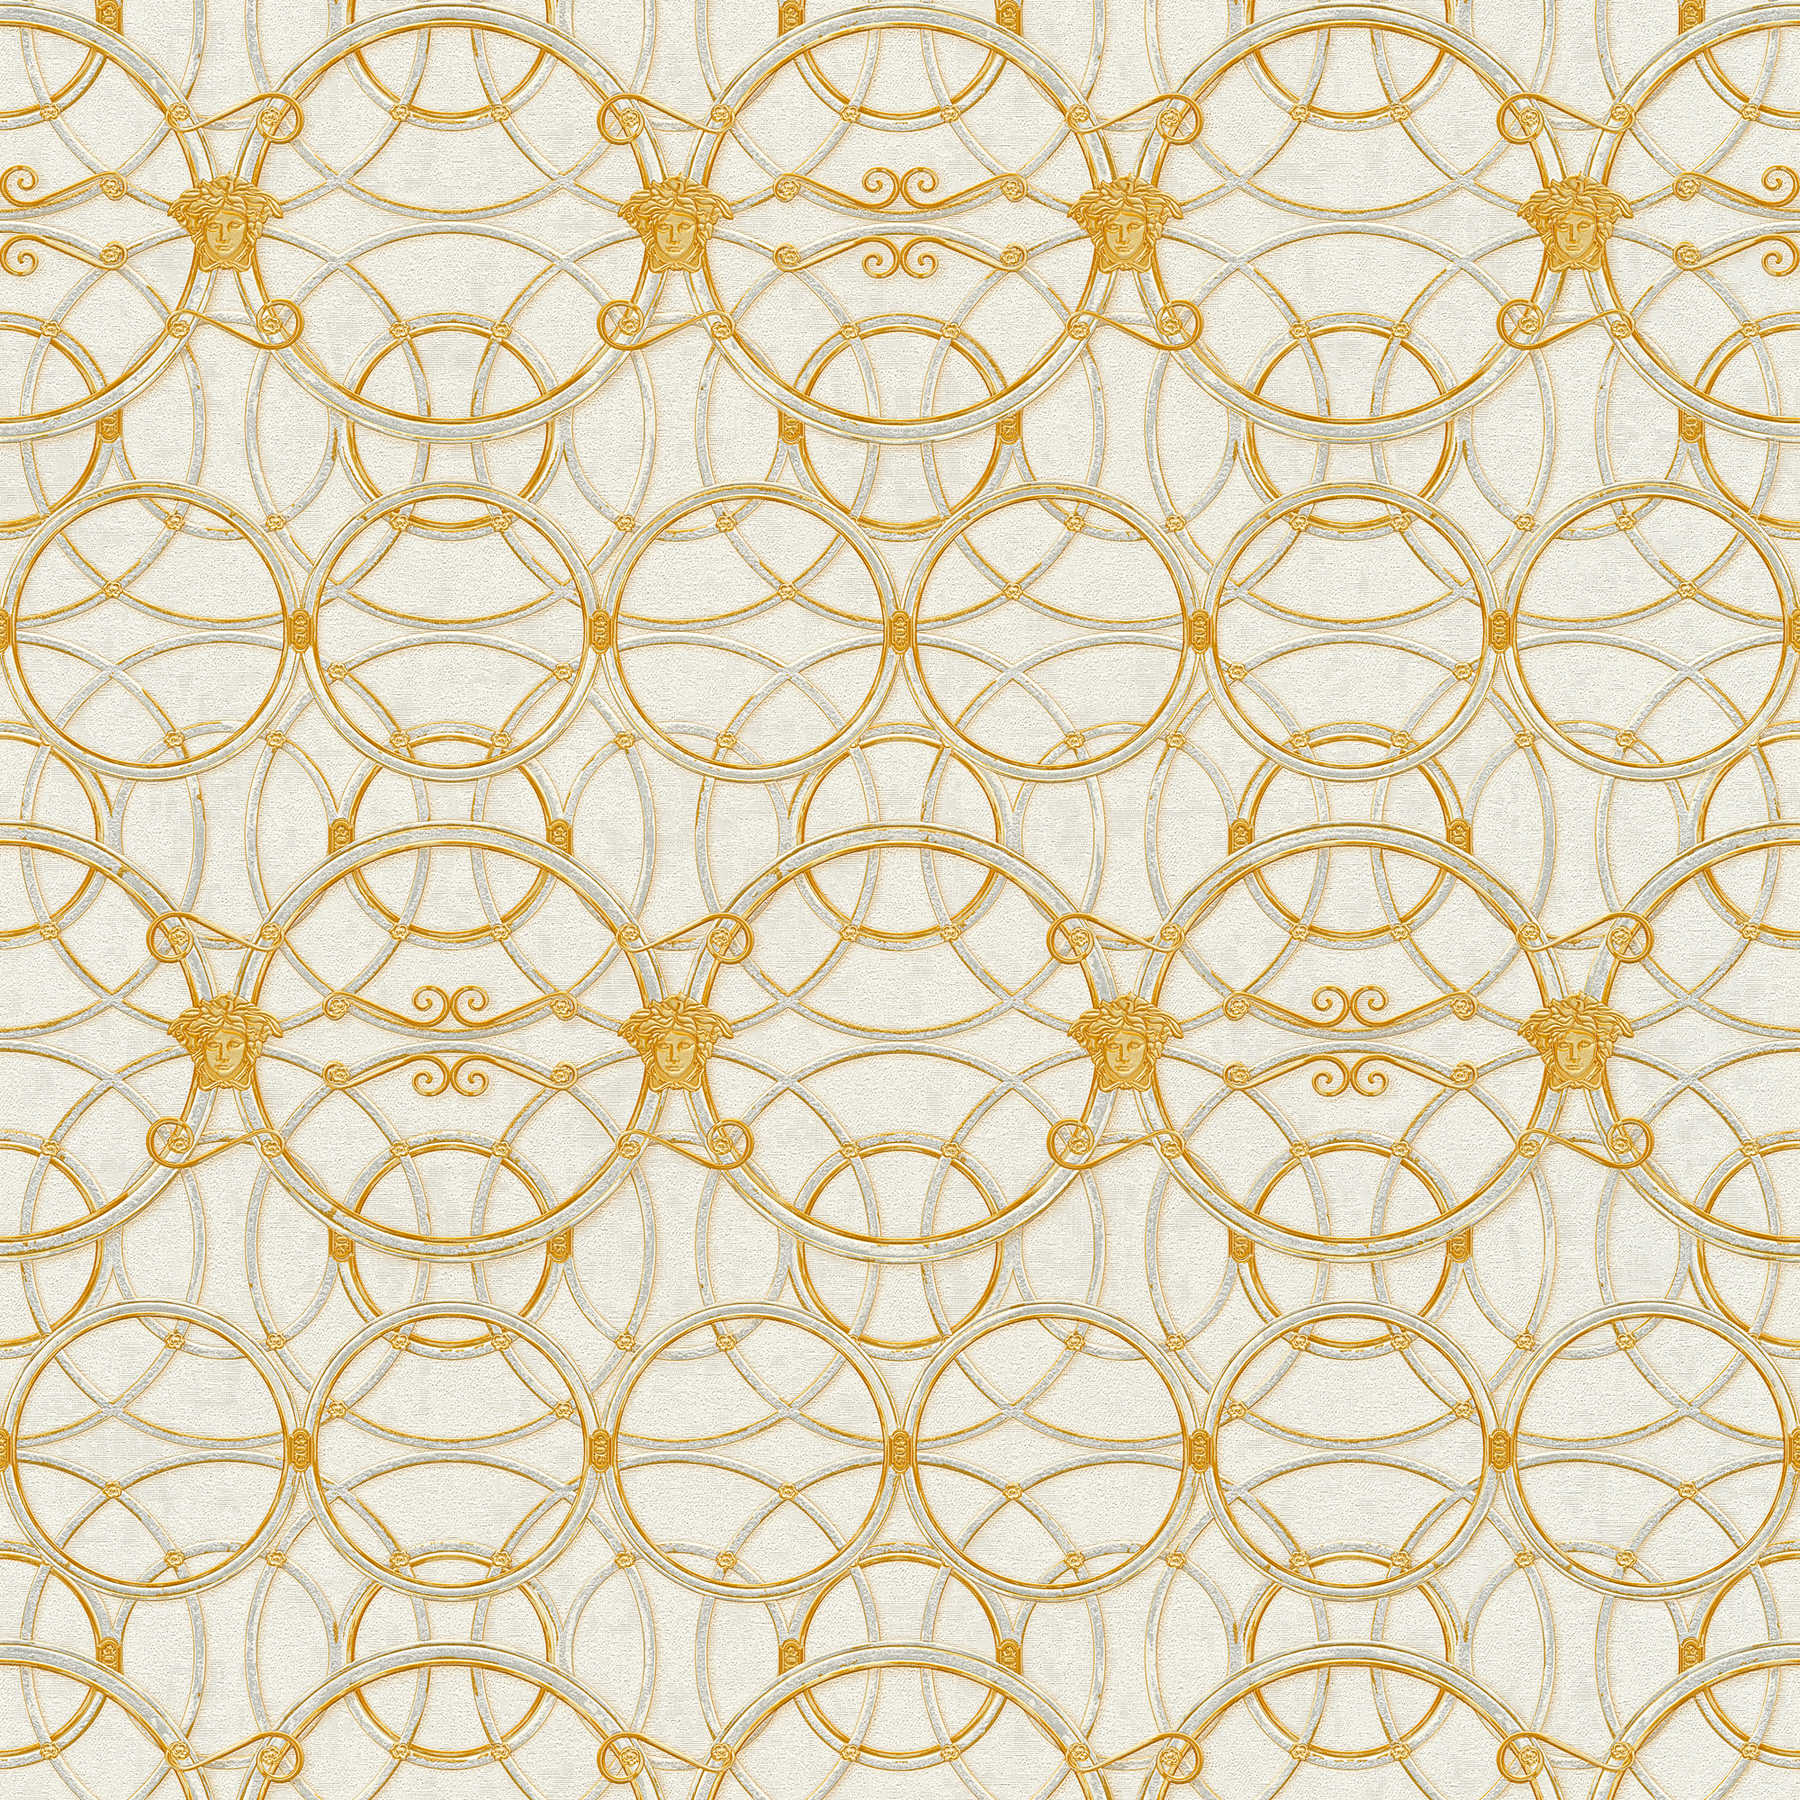         VERSACE Home wallpaper circle pattern and Medusa - gold, cream, white
    